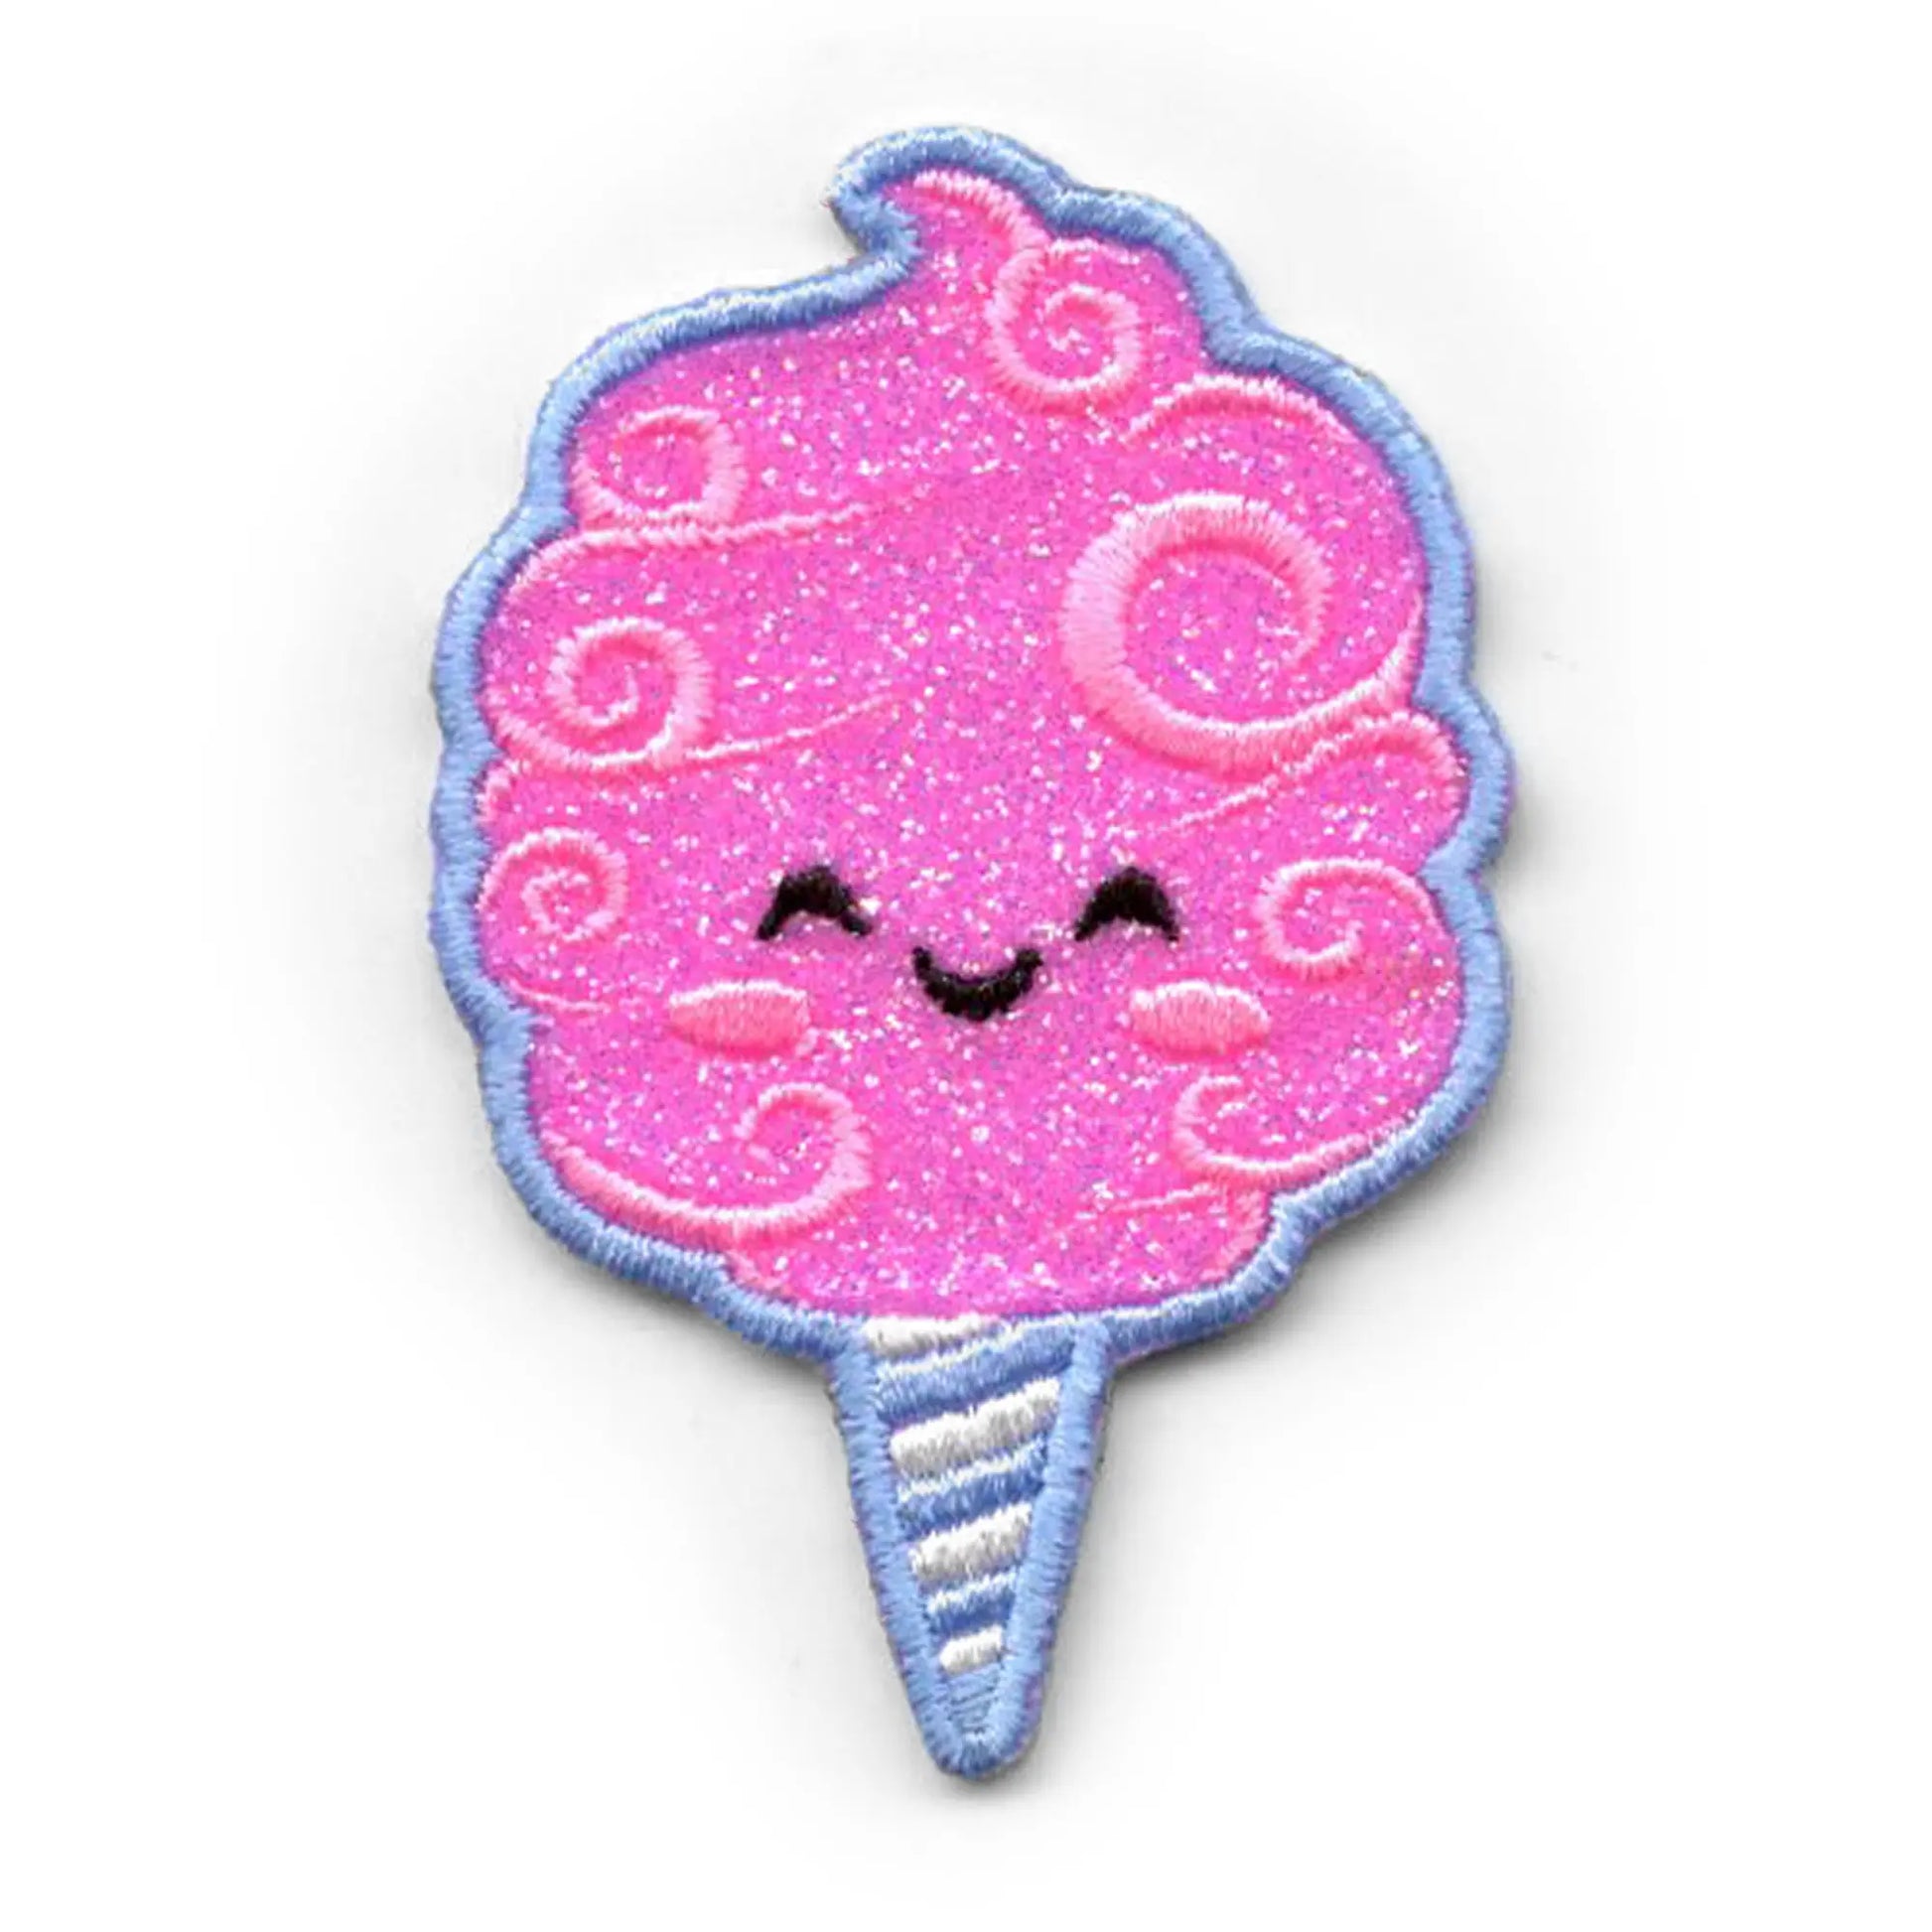 Cute Anime Iron on Patch Kawaii Embroidery, Patches for Kawaii